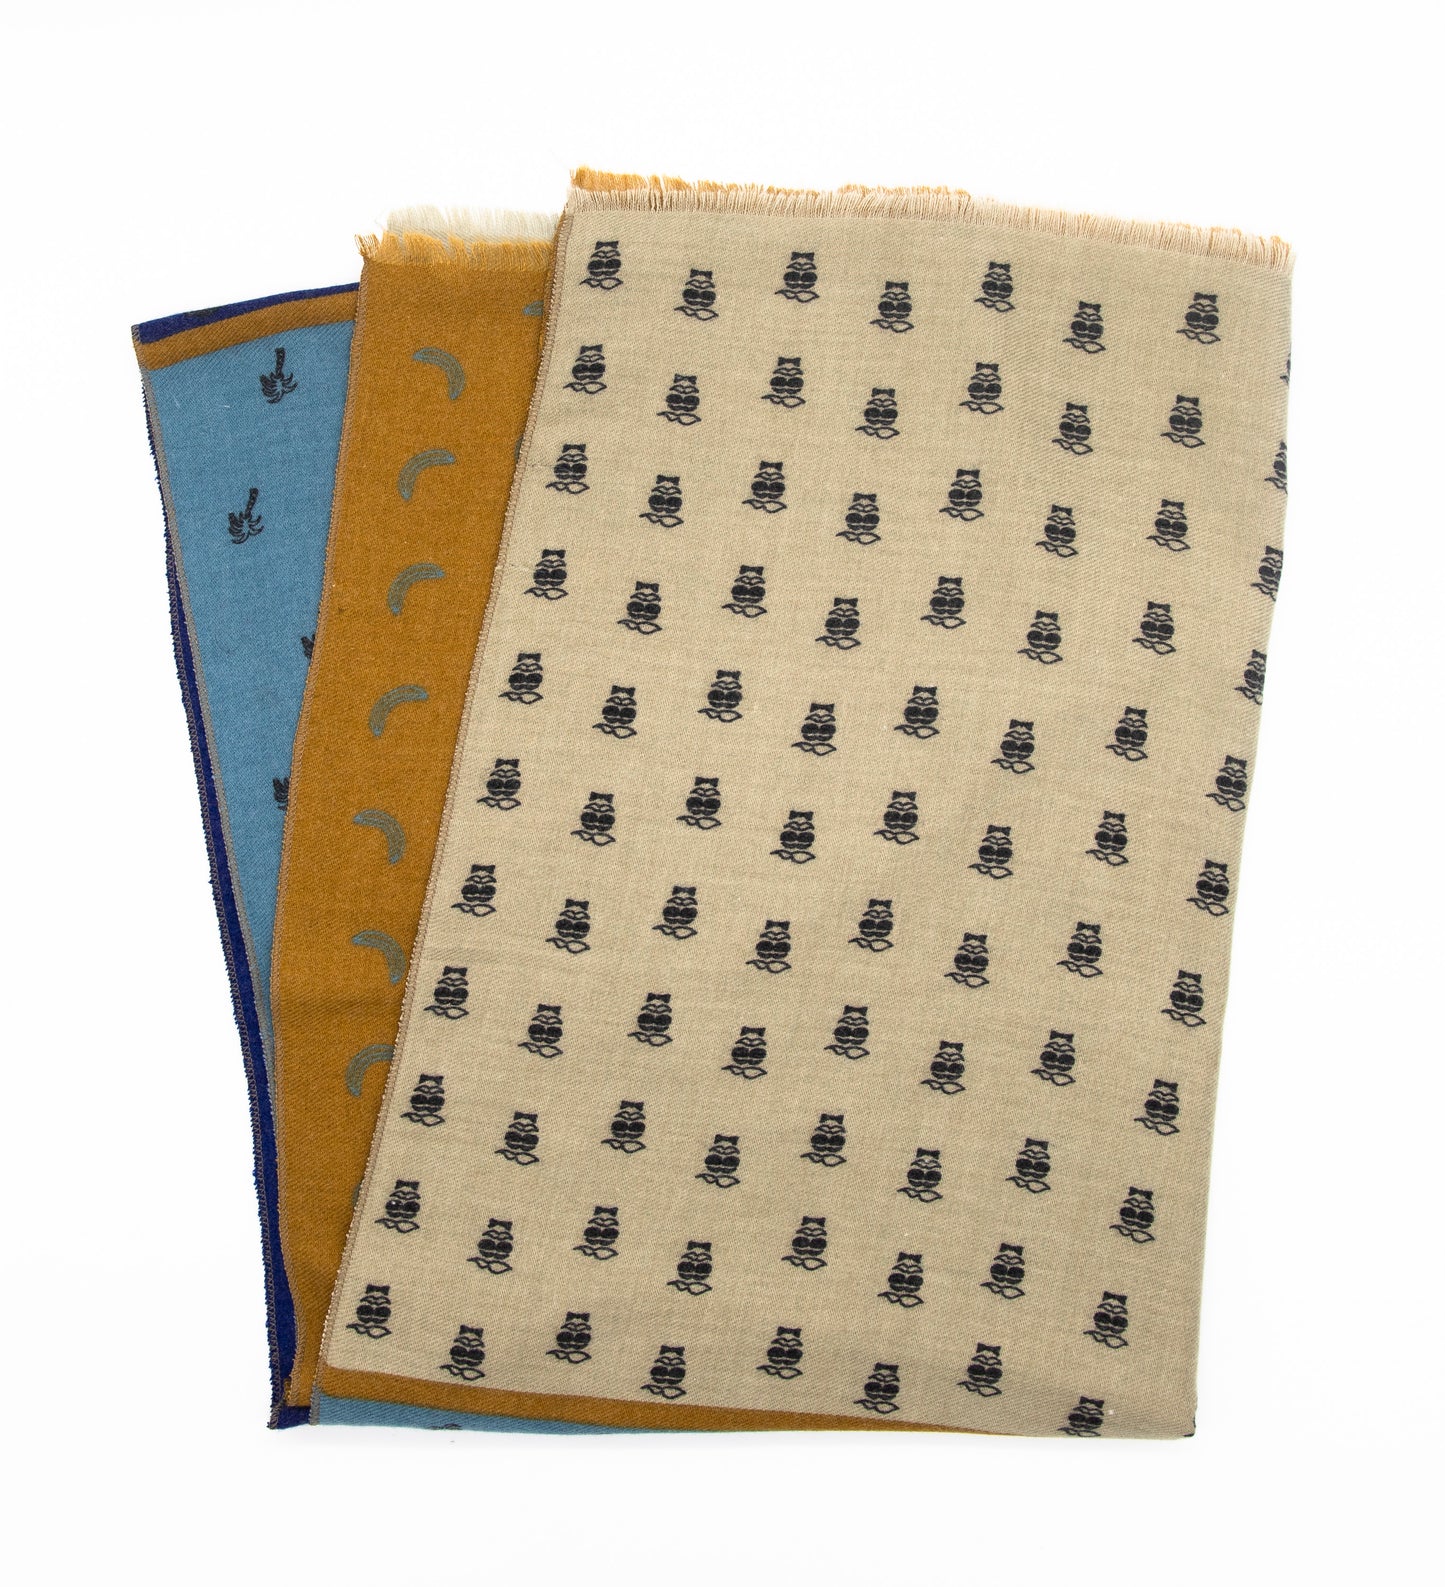 This is a soft and warm cotton scarf for men in vintage style in modern bananas, palms and moustache print in beige, brown, green and blue made of a special cotton blend that gives you a wonderful cashmere-like feeling without hurting animals. It is a vegan scarf certified by PETA and a perfect gift idea for men.